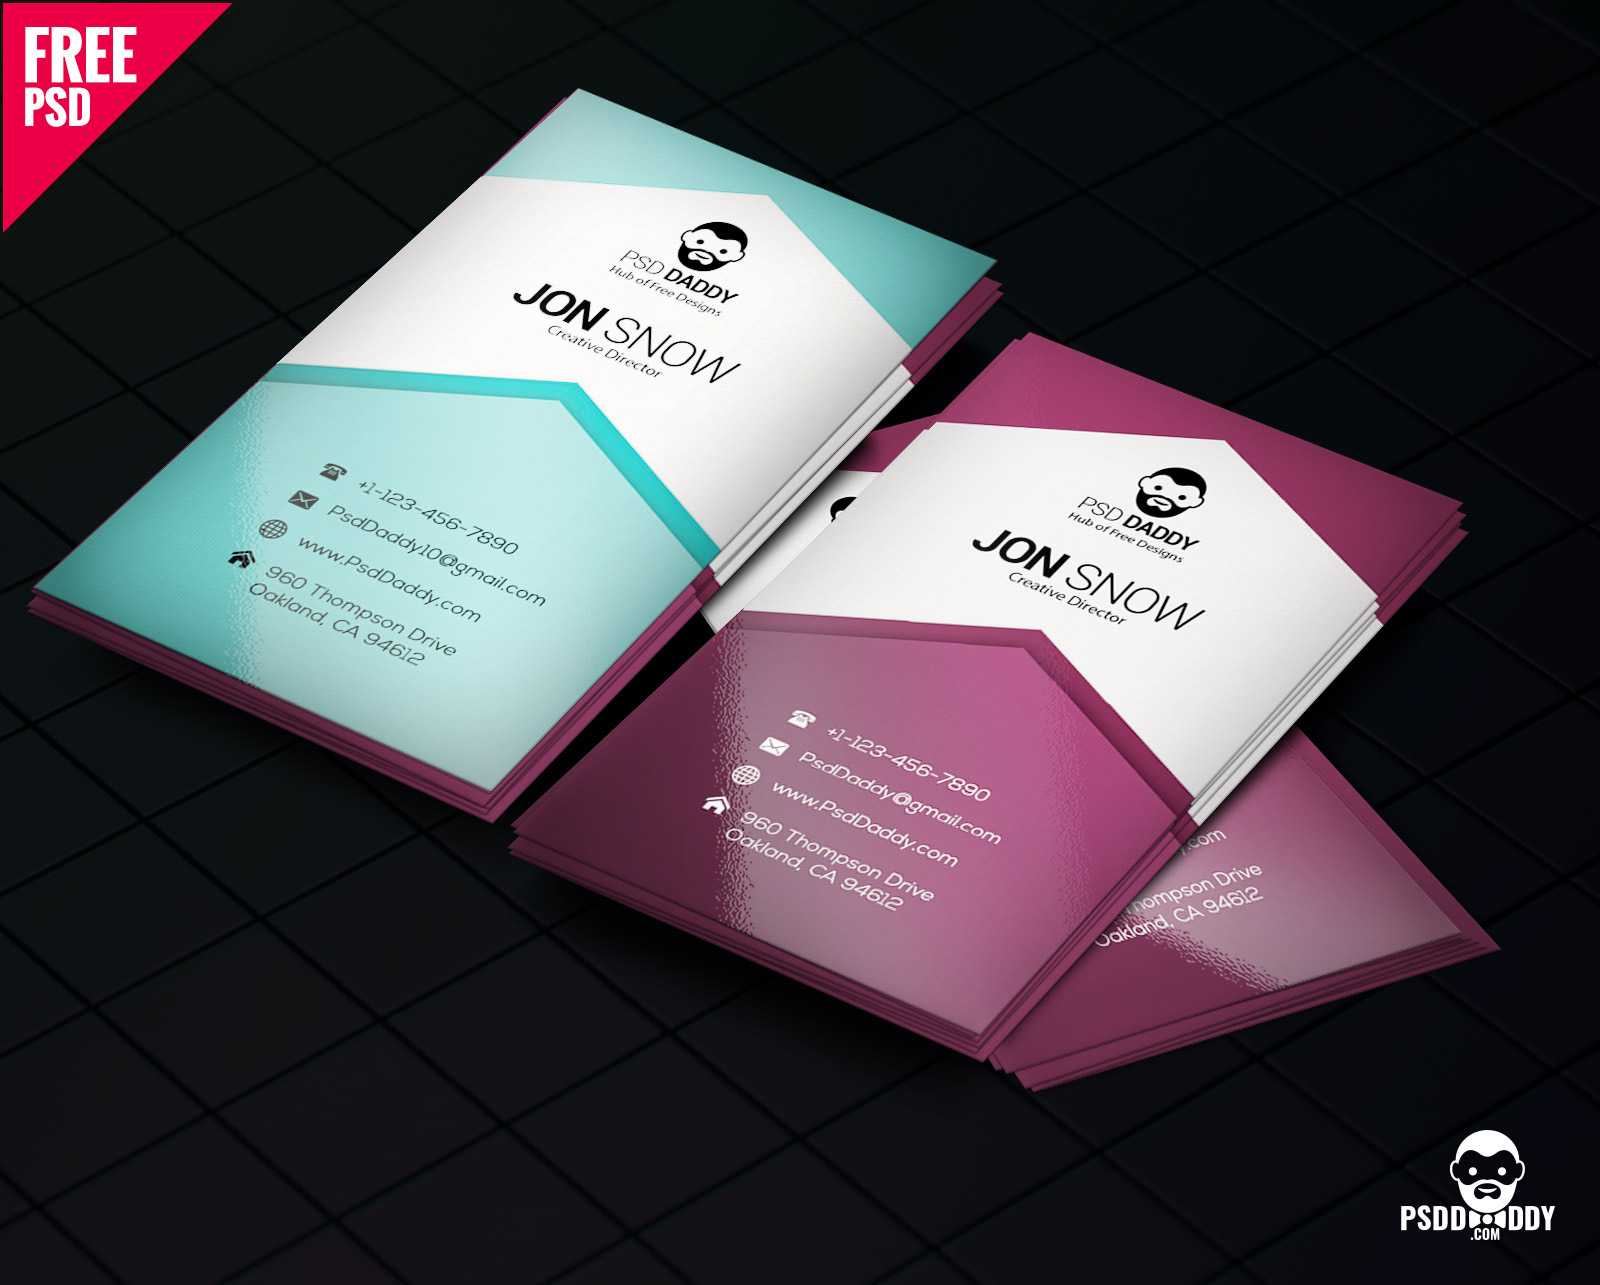 Download]Creative Business Card Psd Free | Psddaddy Within Business Card Size Photoshop Template